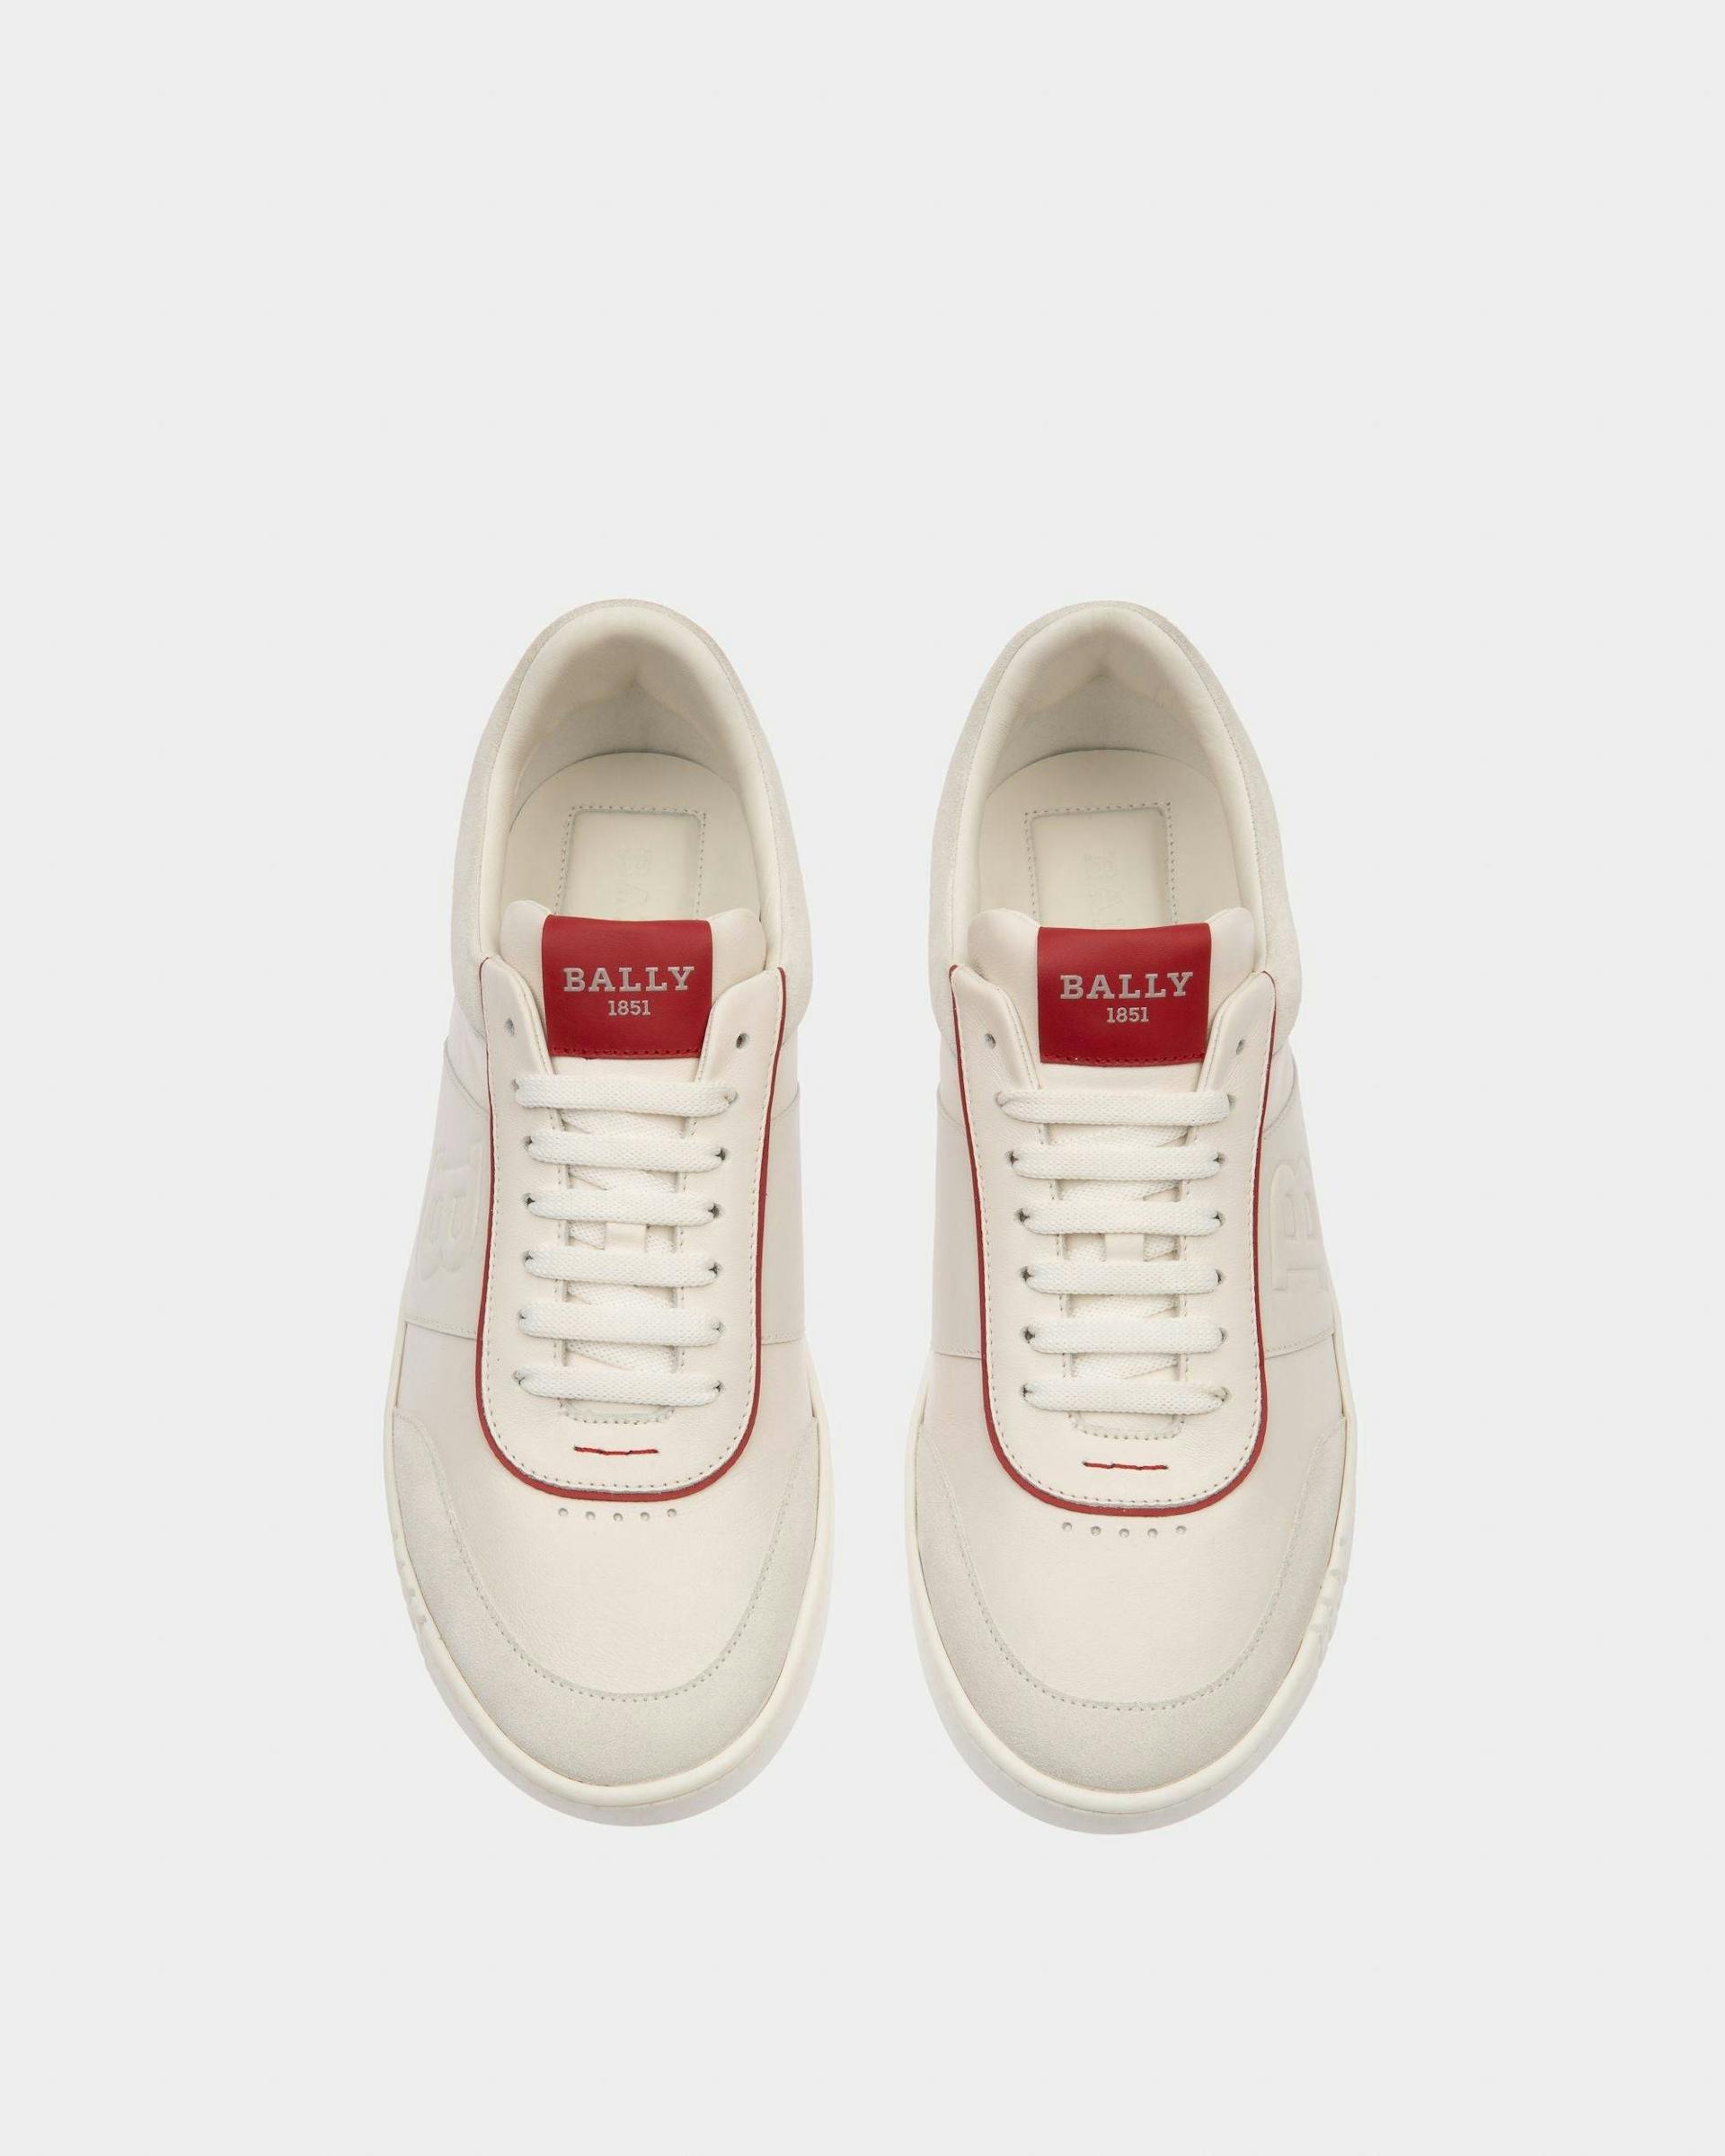 Wallys Leather And Suede Sneaker In White And Red - Men's - Bally - 02